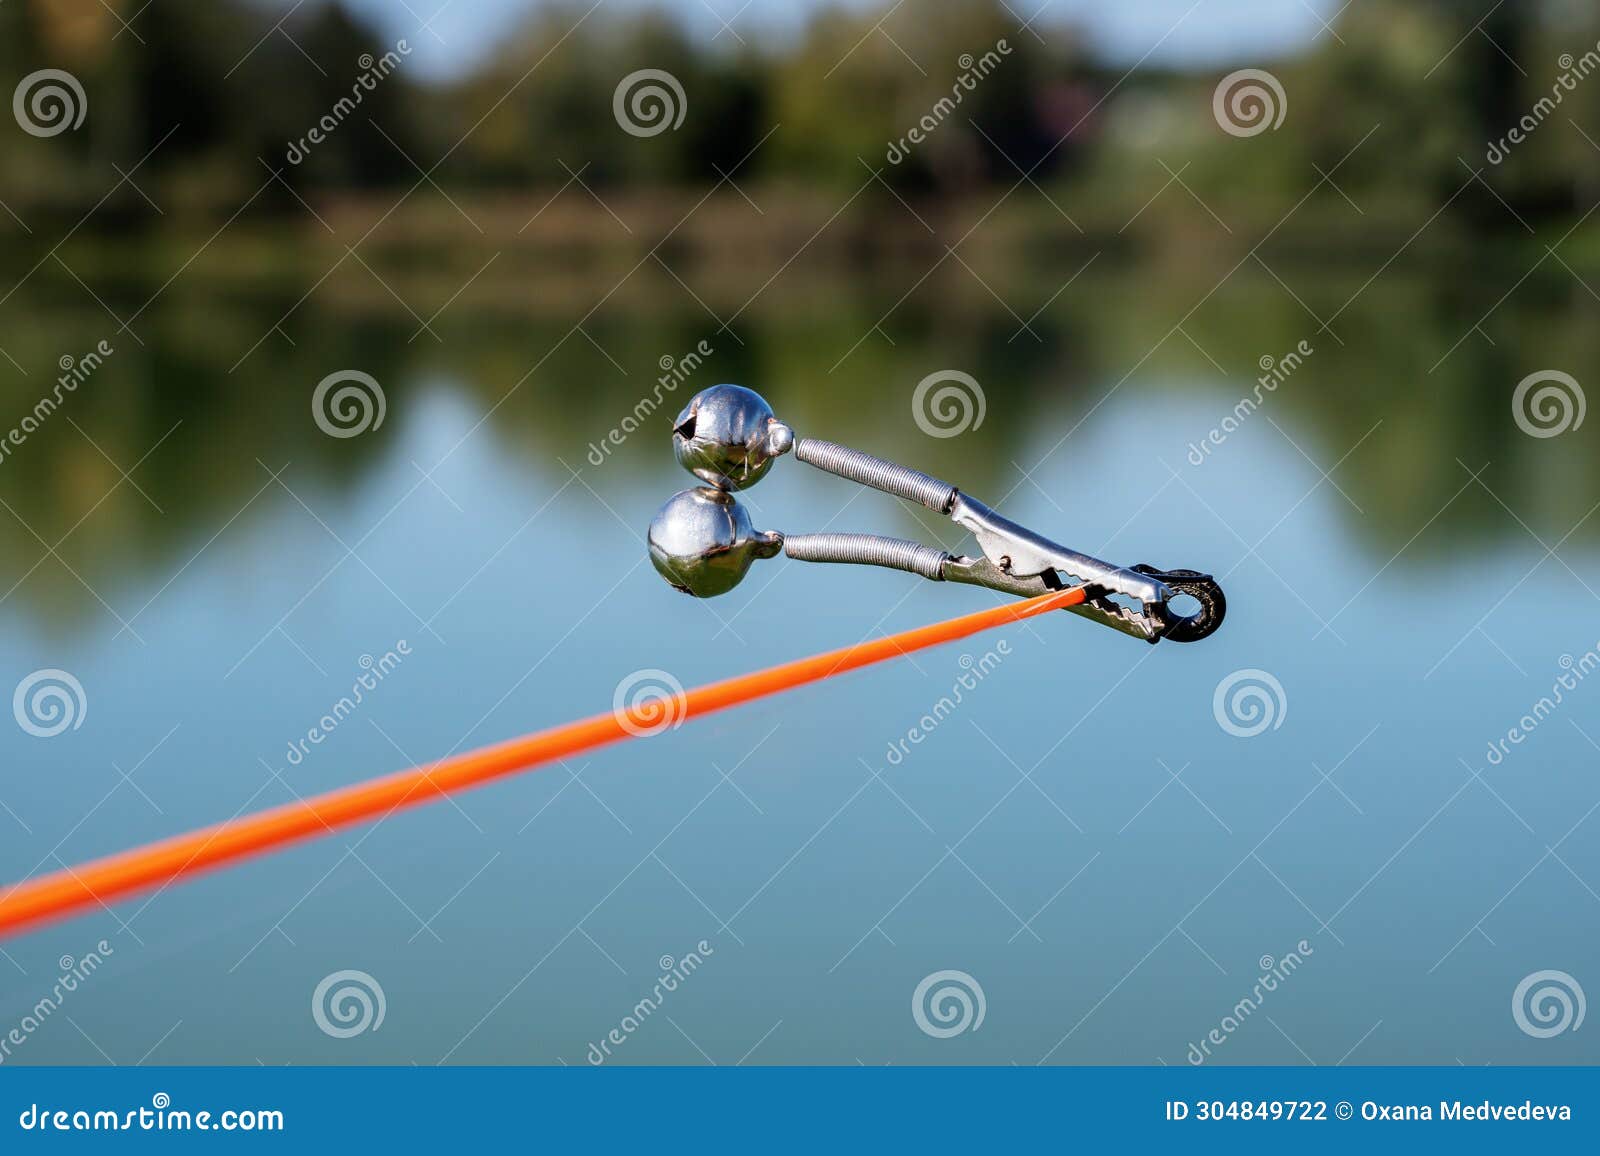 https://thumbs.dreamstime.com/z/bell-alarm-fishing-rod-spinning-nature-bells-allure-attached-to-end-abandoned-water-standing-stretched-304849722.jpg